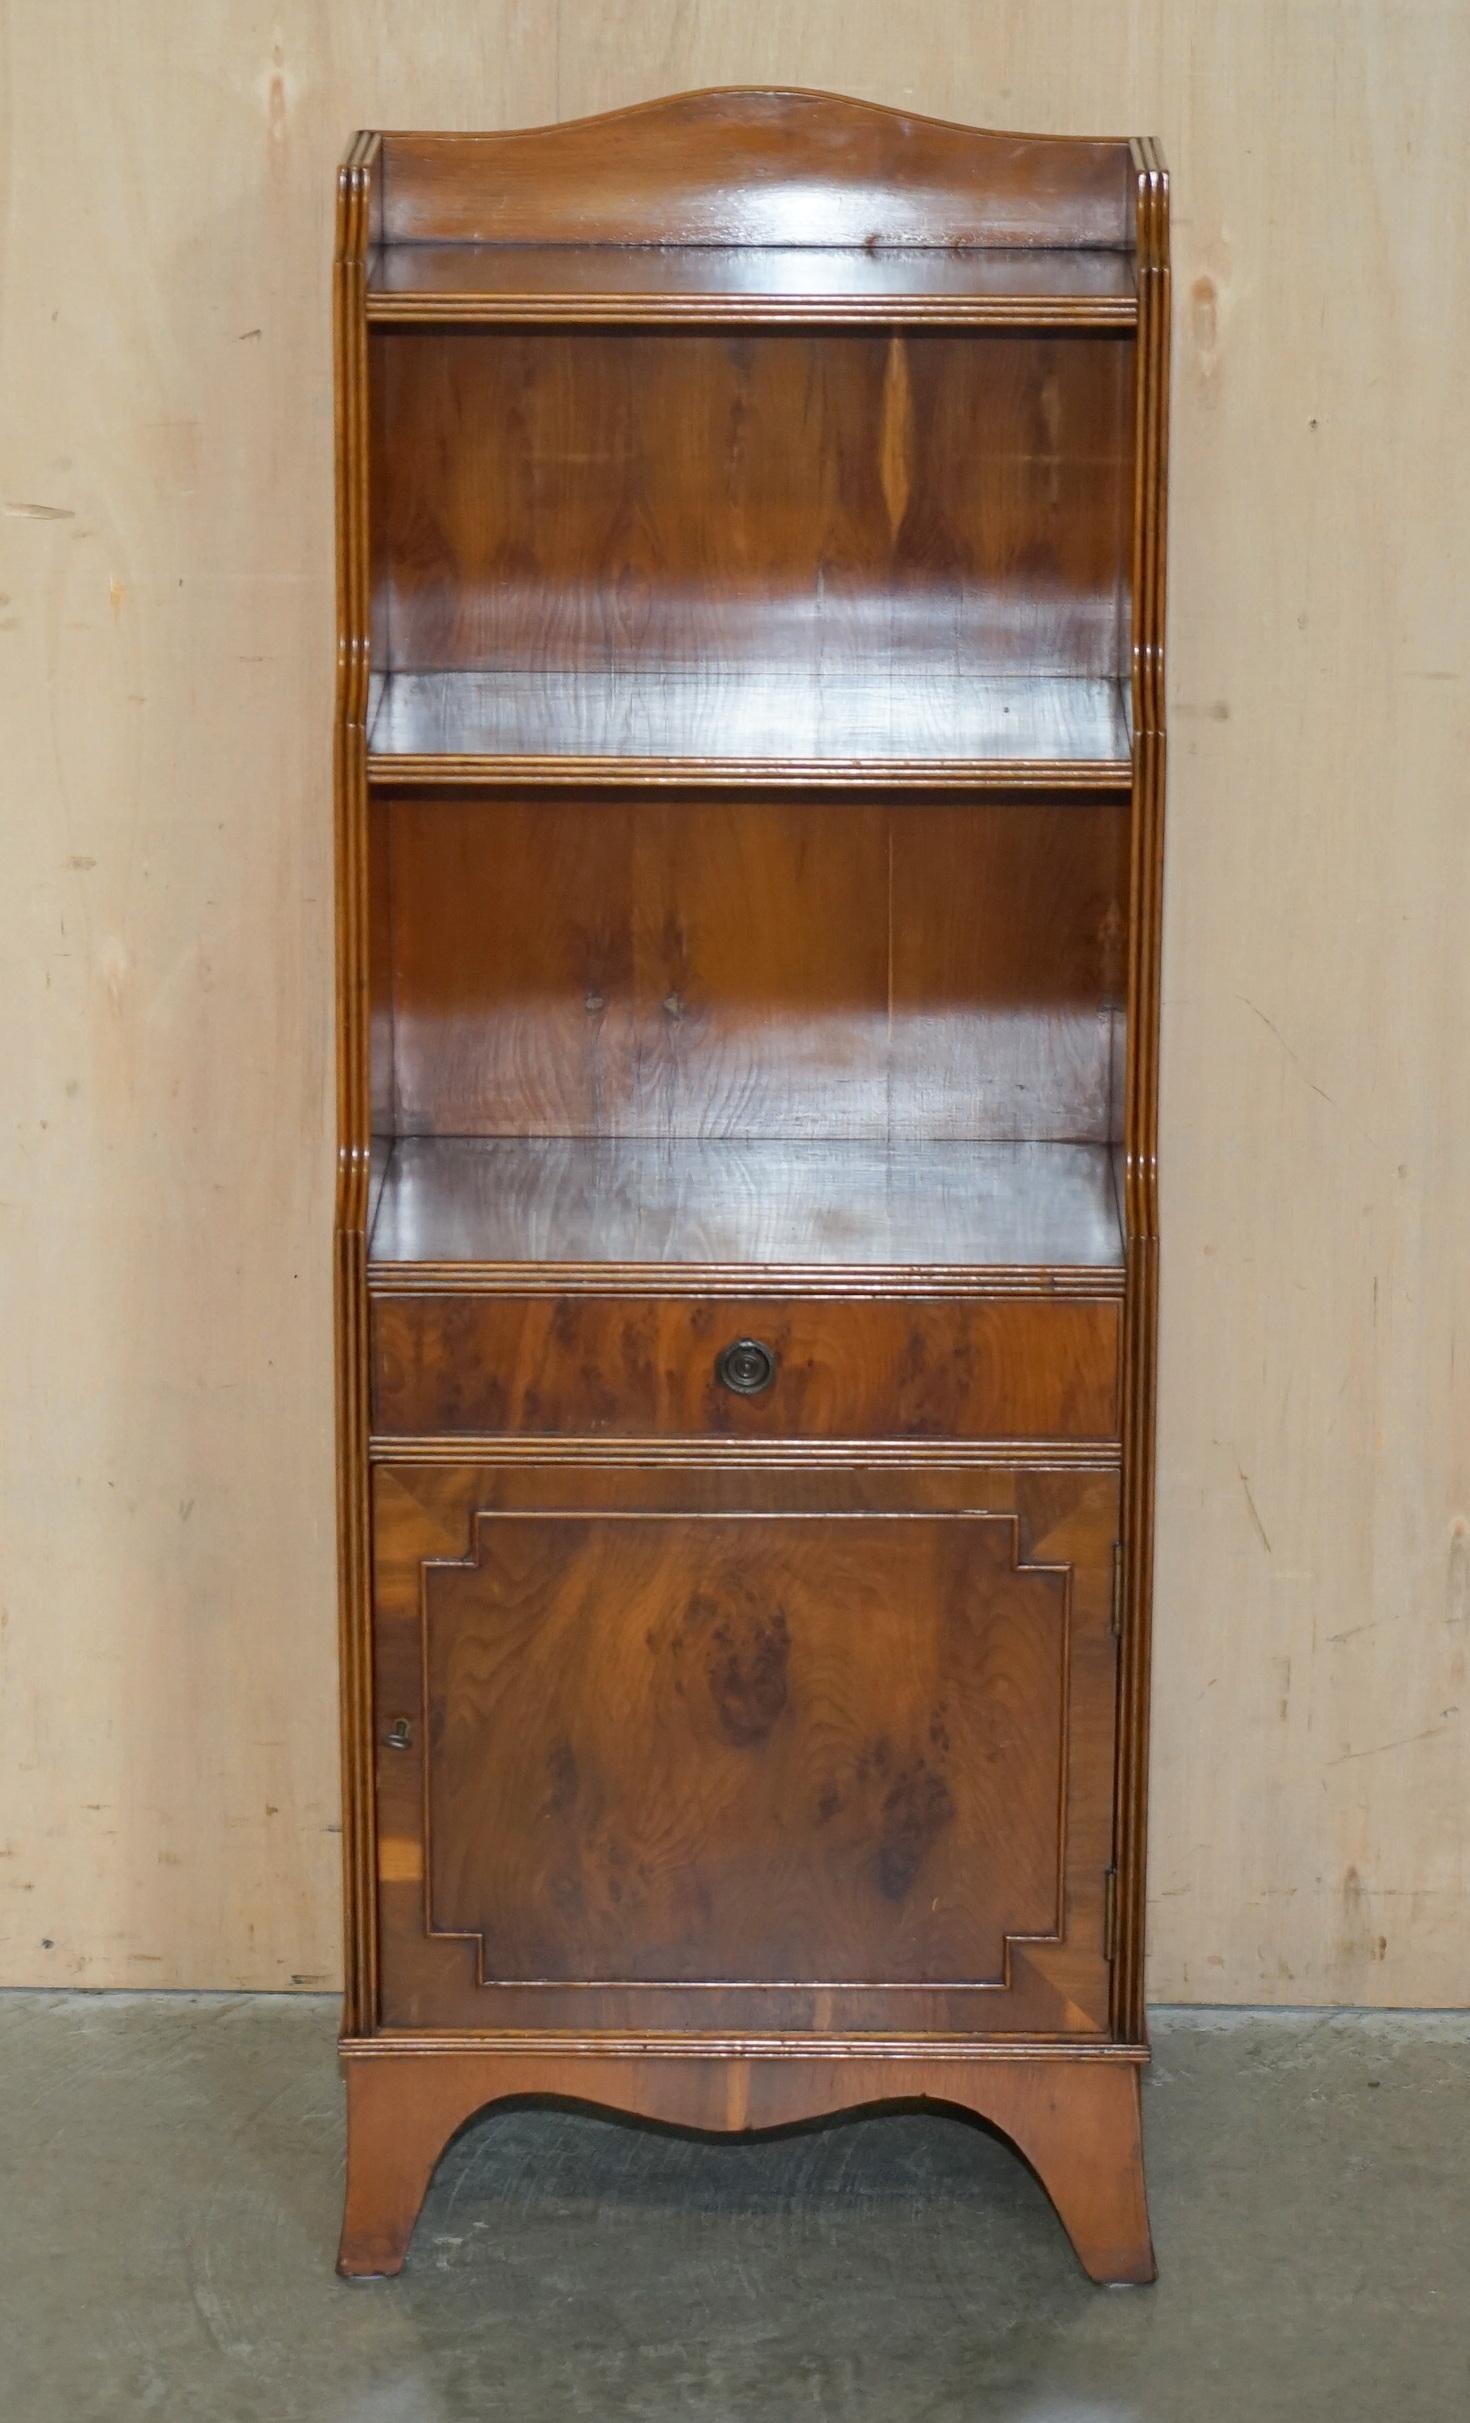 Country PAIR OF ViNTAGE ENGLISH FLAMED HARDWOOD WATERFALL BOOKCASES WITH CUPBOARD BASES For Sale